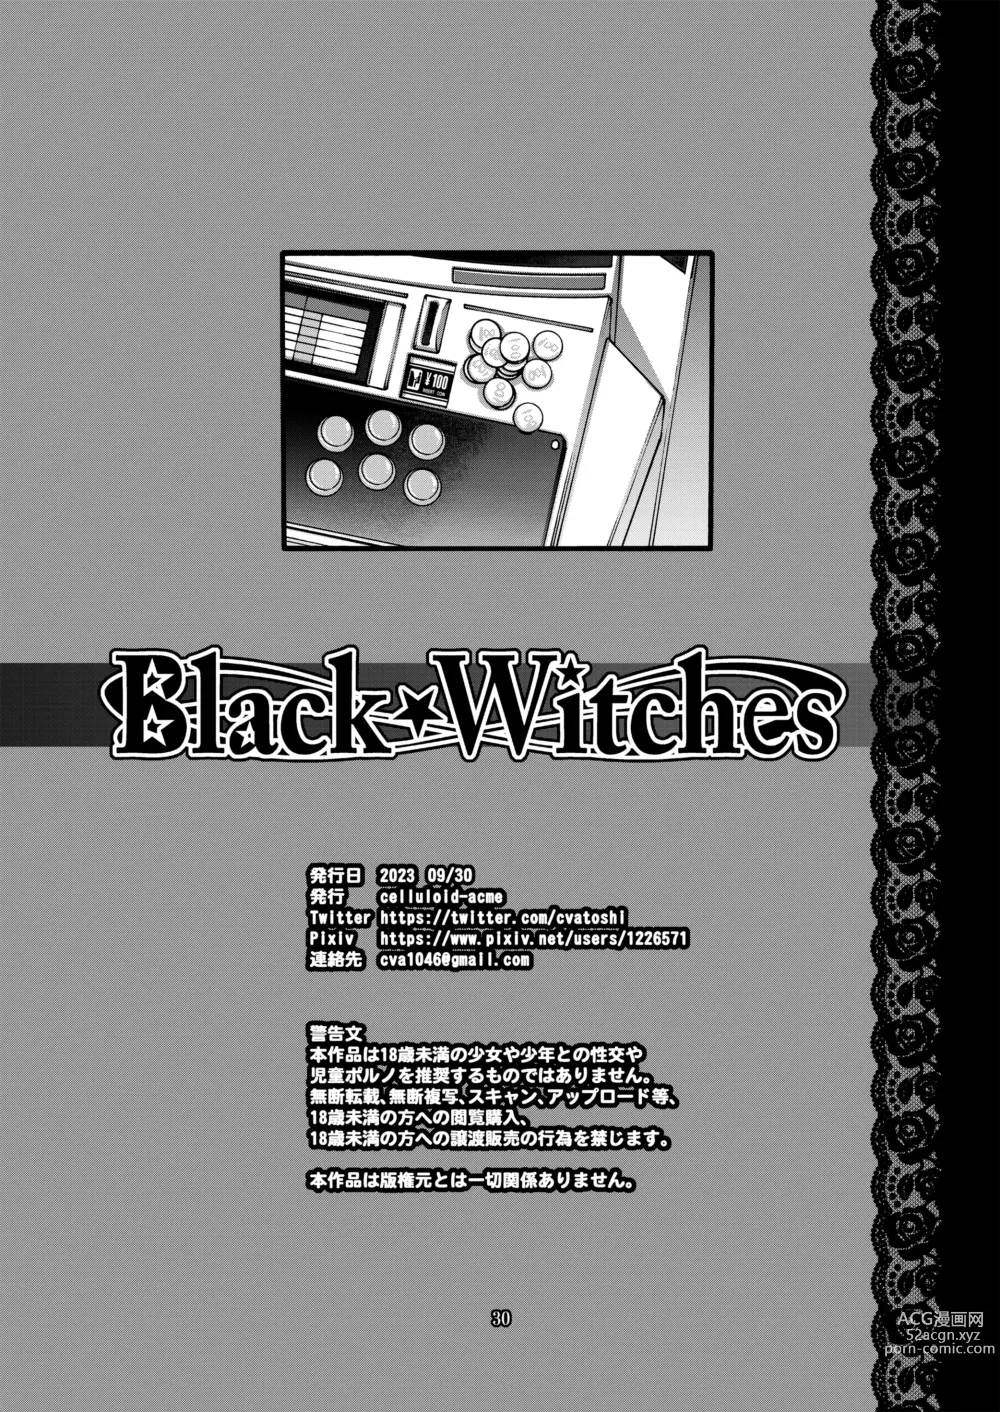 Page 29 of doujinshi Black Witches 9